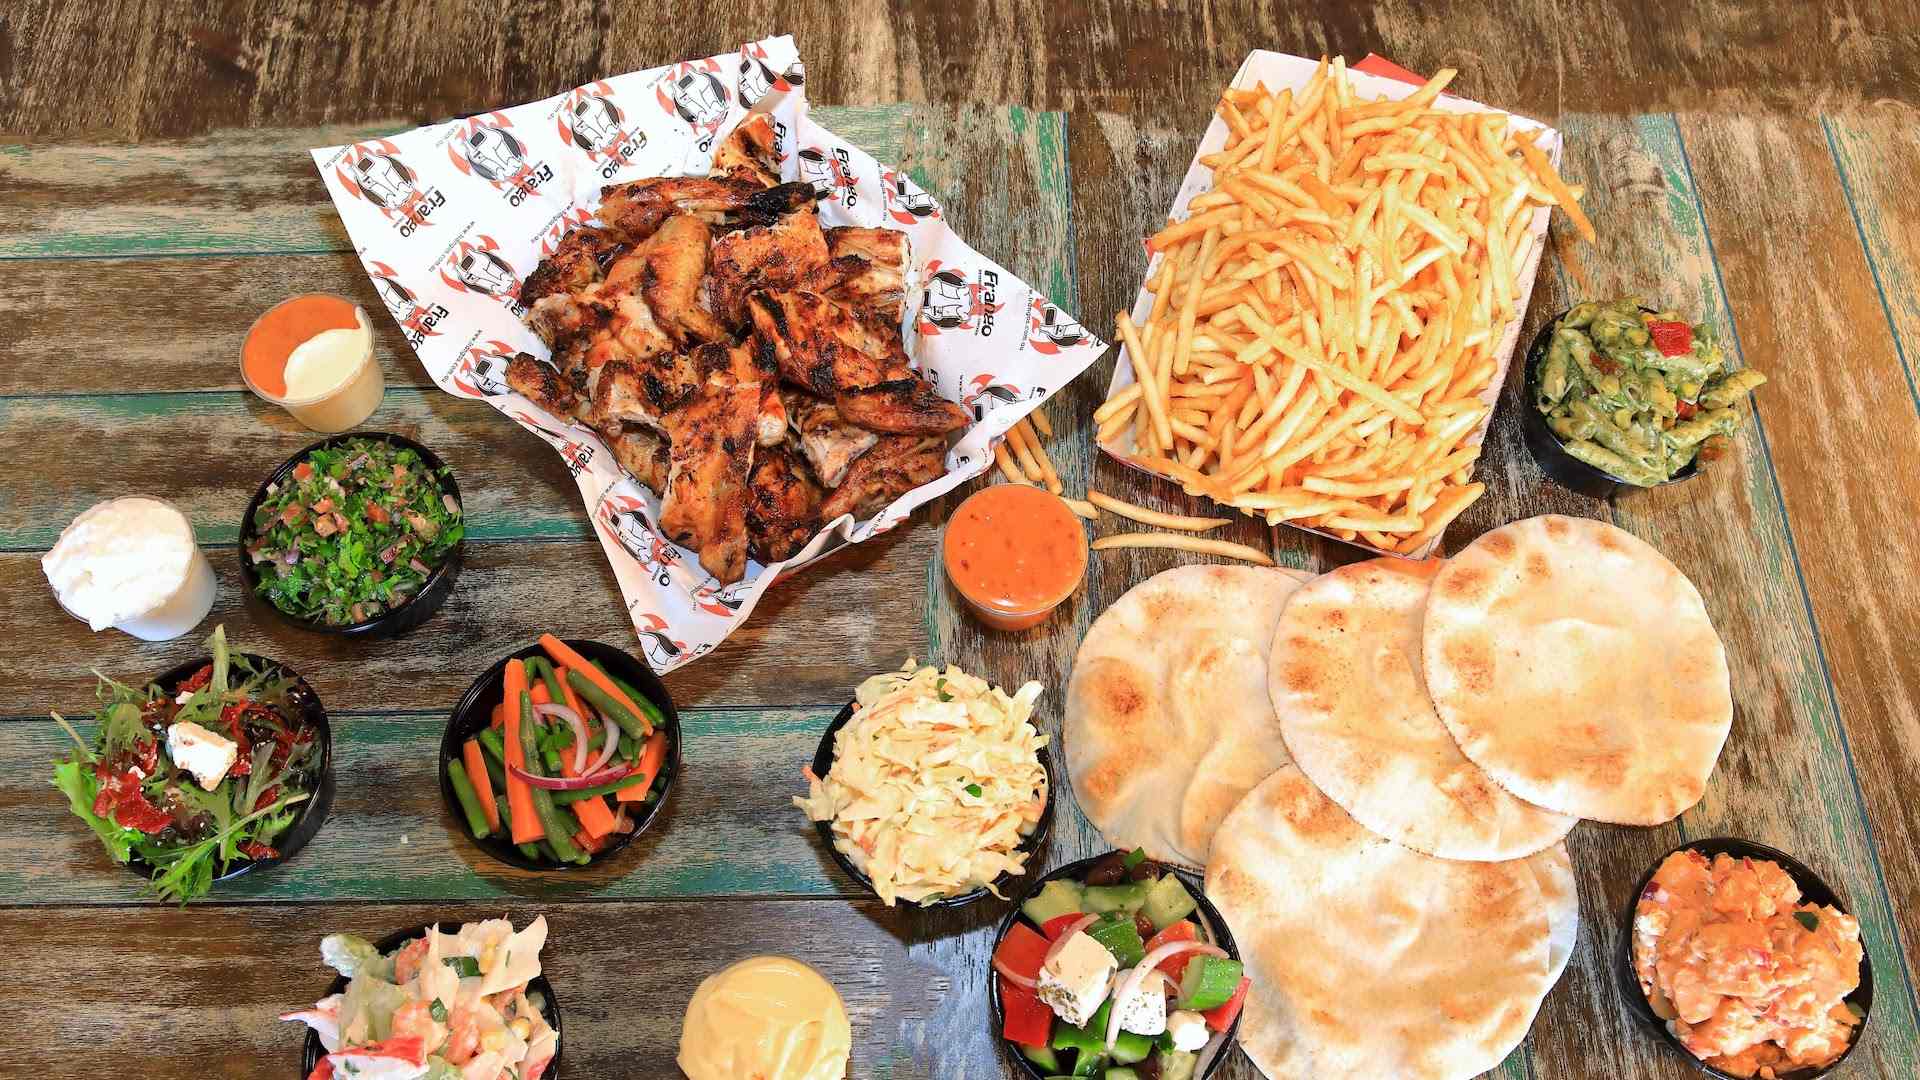 a huge spread of charcoal chciken, chips, flat bread and salads from Frangos Charcoal Chicken in Sydney